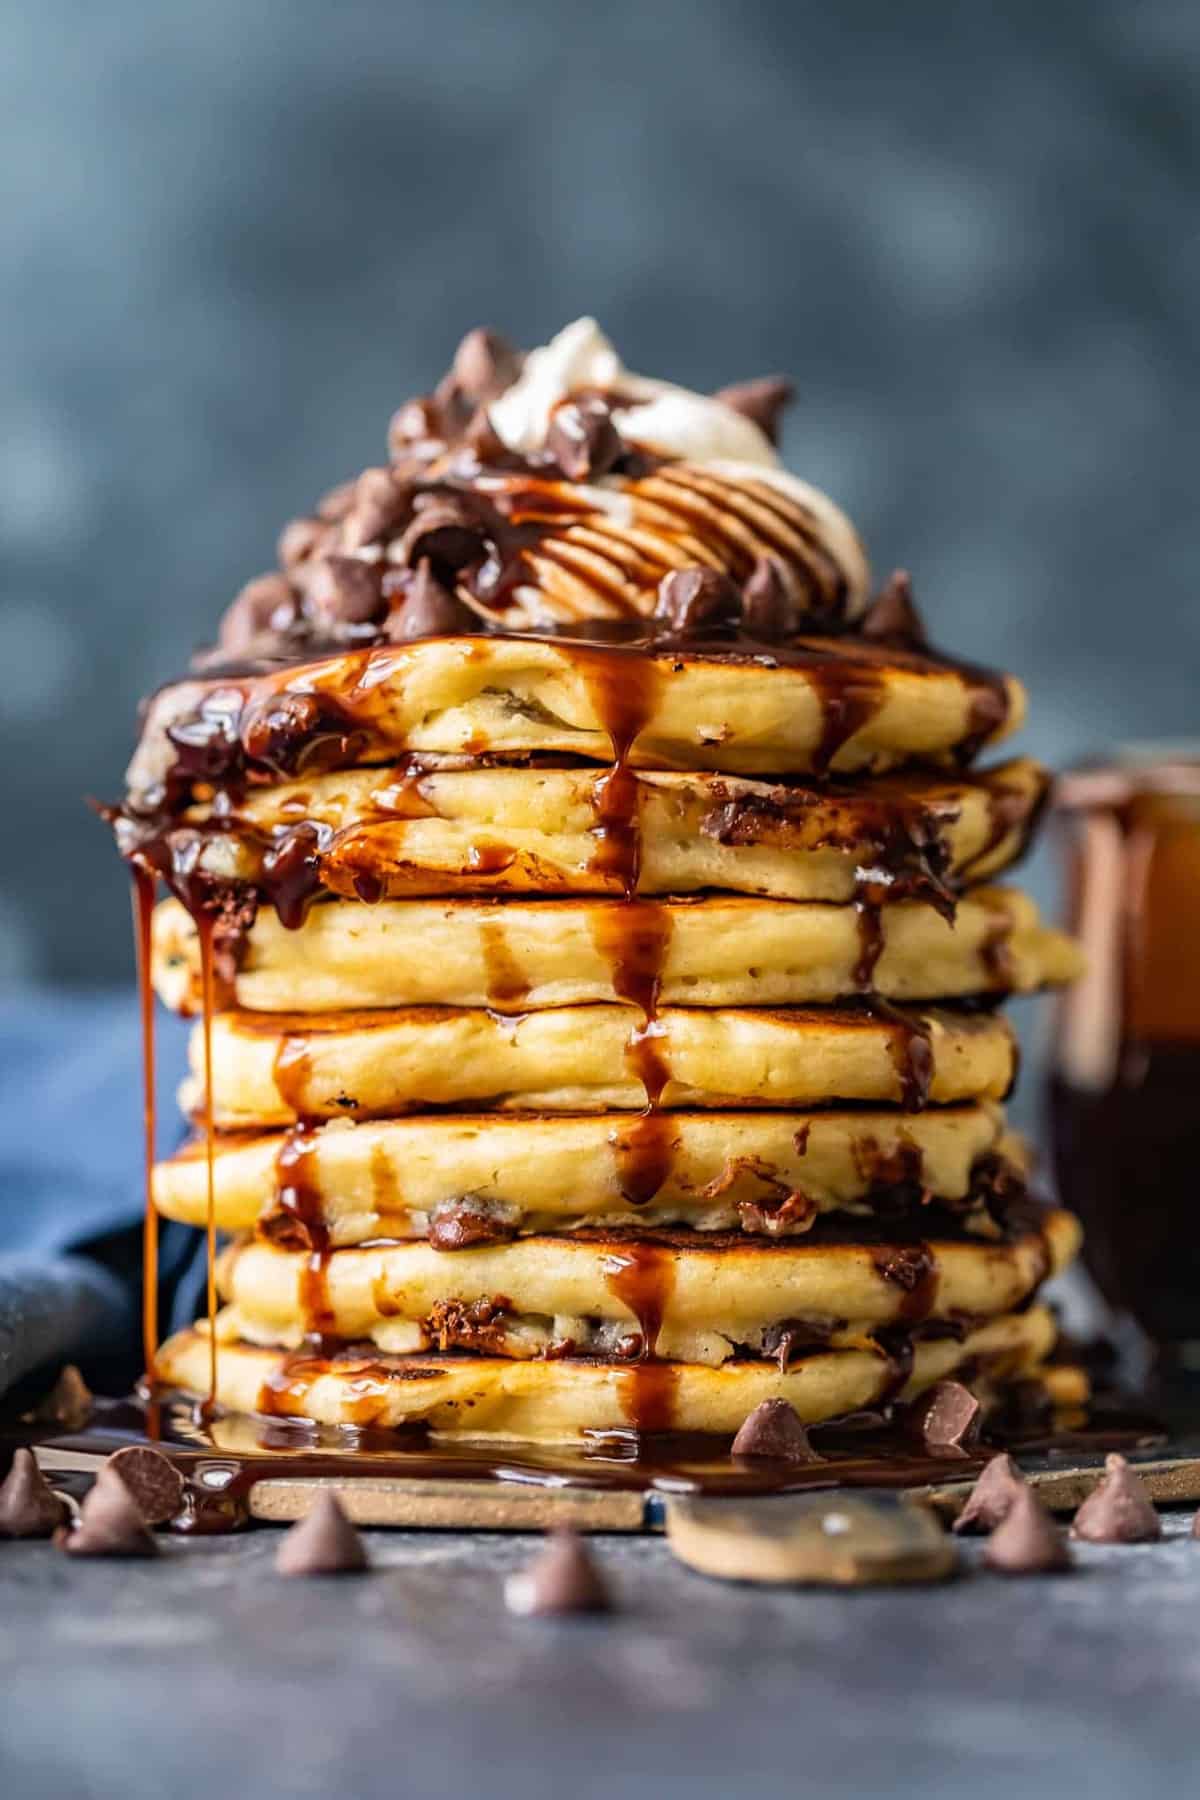 lots of chocolate chip pancakes stacked on each other drizzled with chocolate syrup and whipped cream